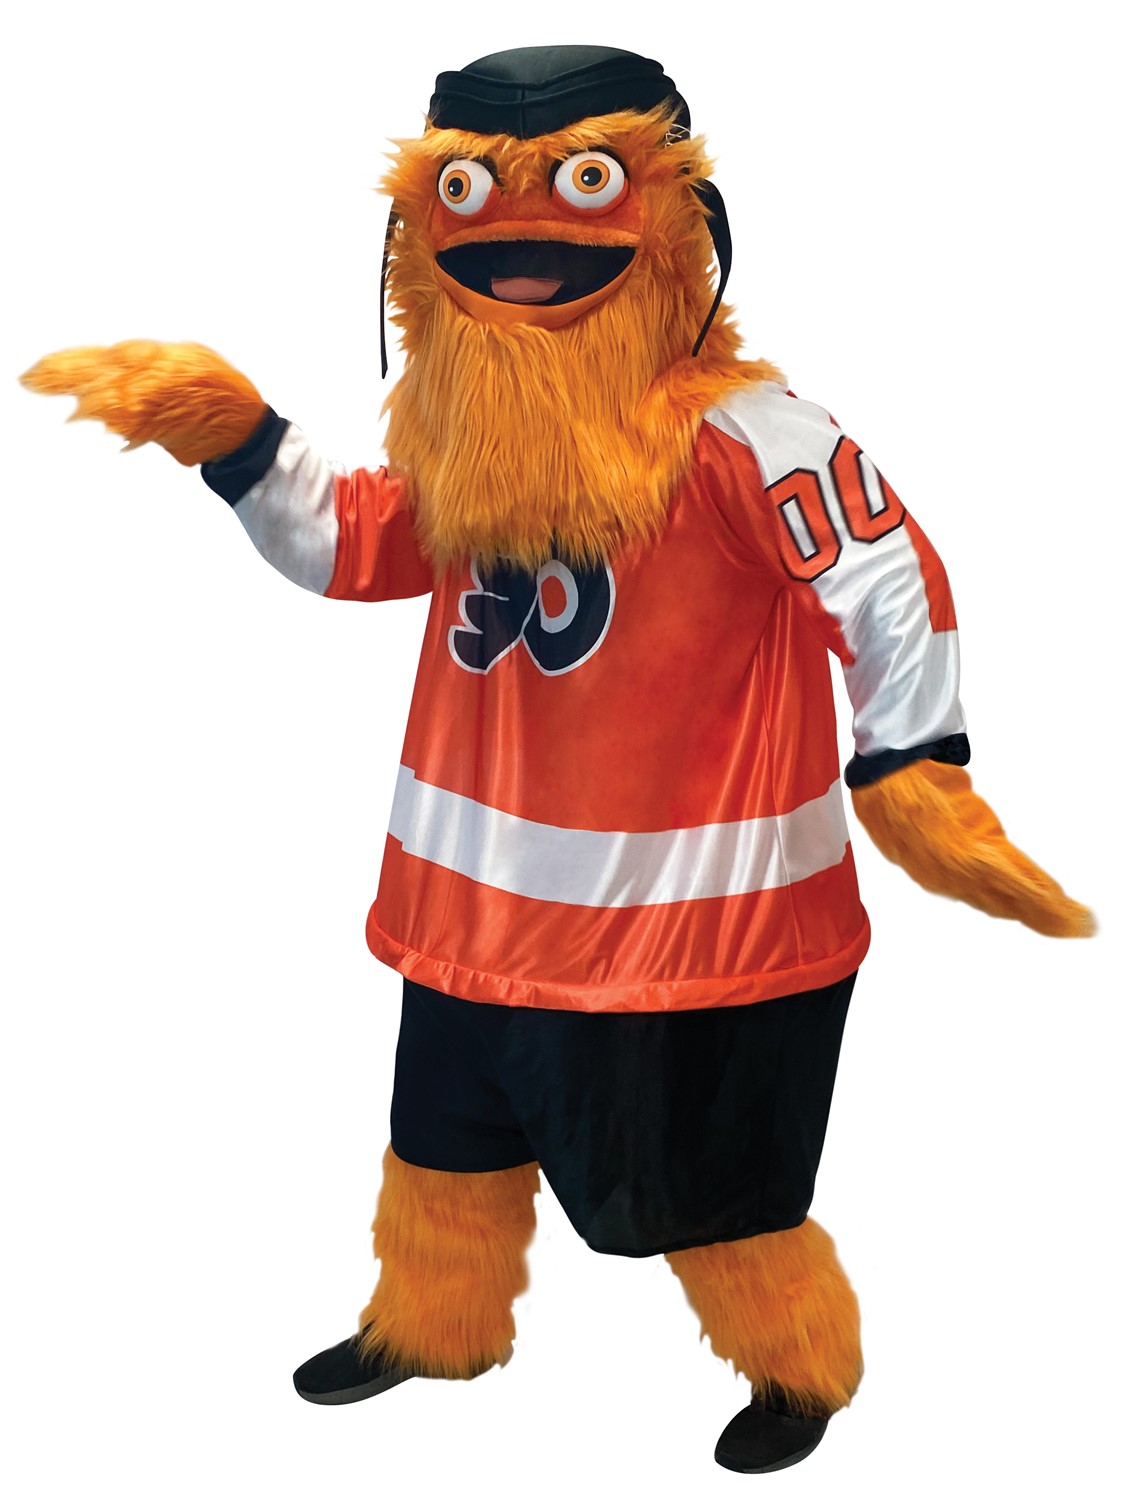 Gritty: The Flyers' Mascot Nobody's Been Waiting For 